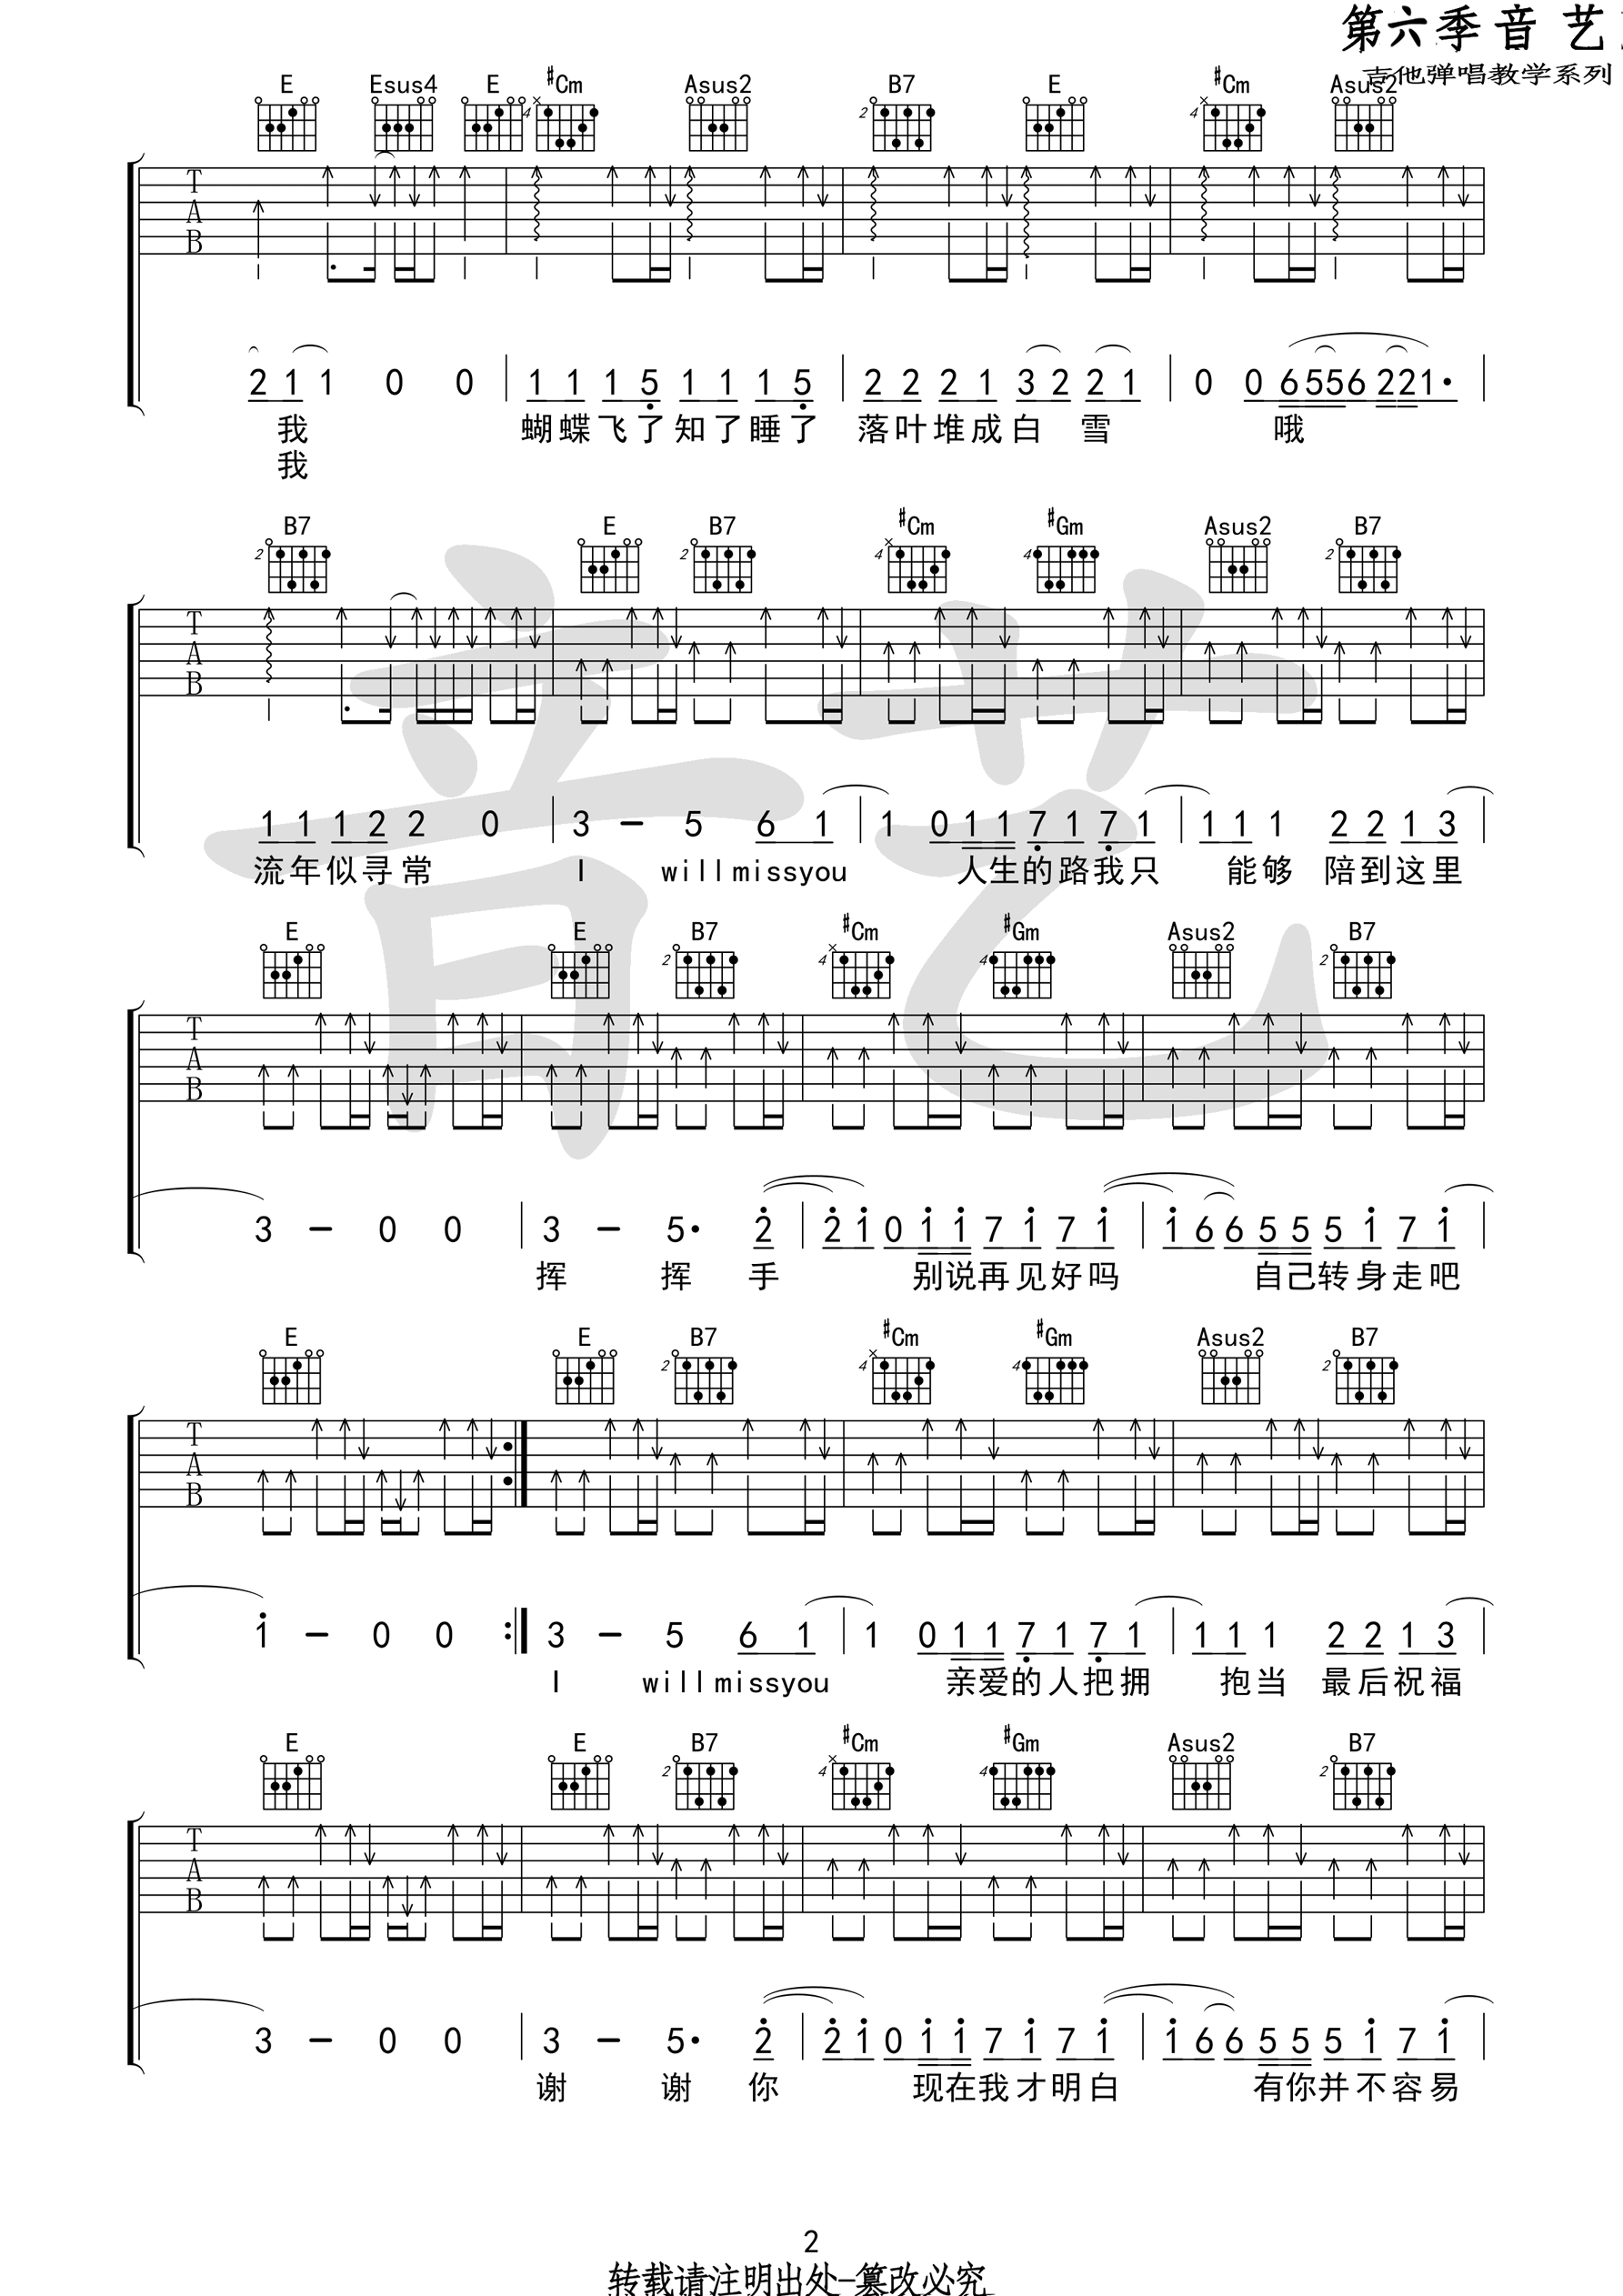 I Miss You by Blink-182 - Guitar Lead Sheet - Guitar Instructor